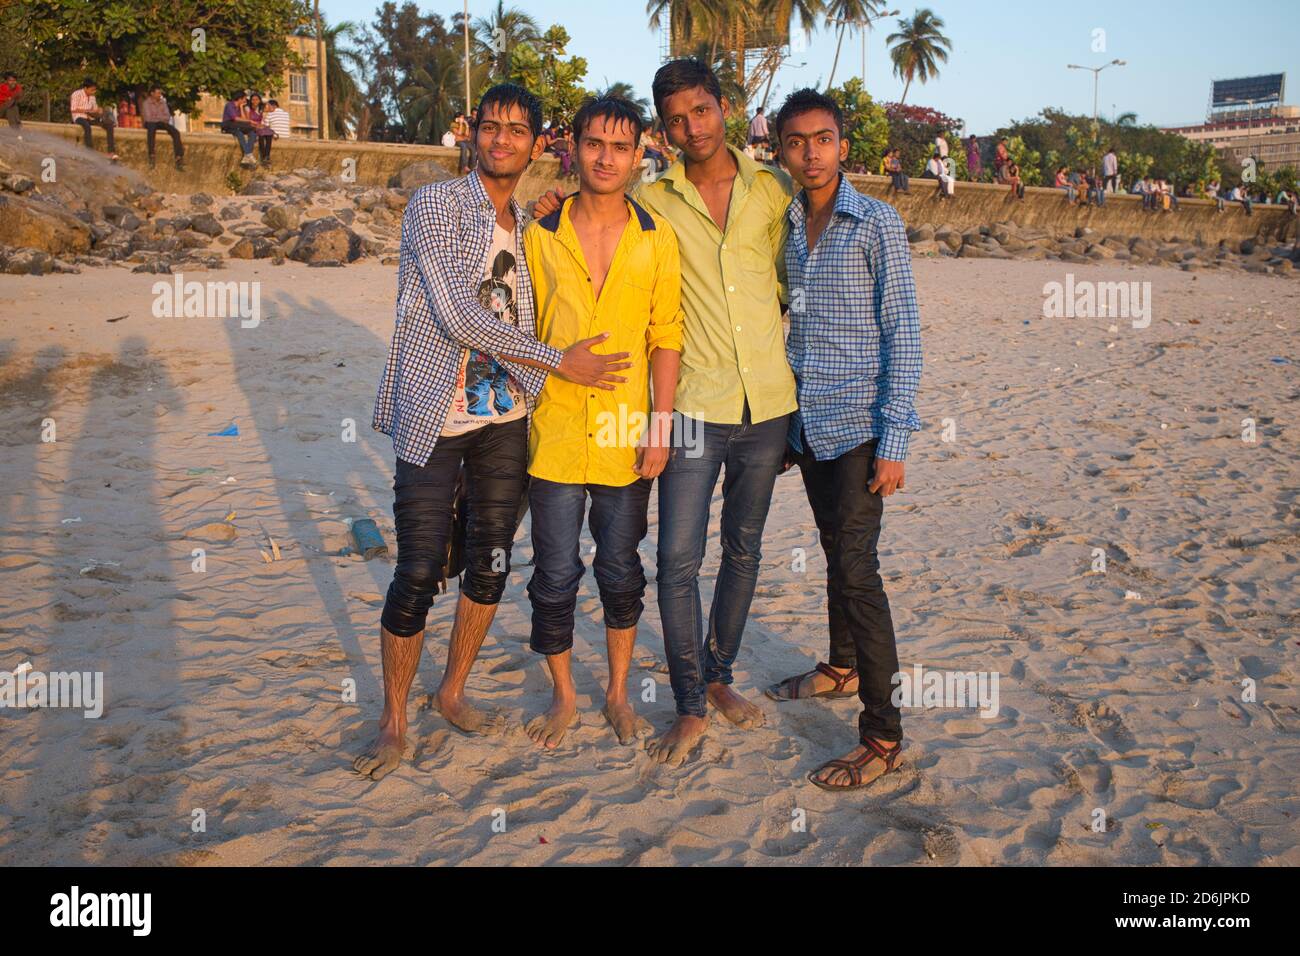 A group of Indian teenage boys visiting Chowpatty Beach in Mumbai, India, posing for a photo Stock Photo